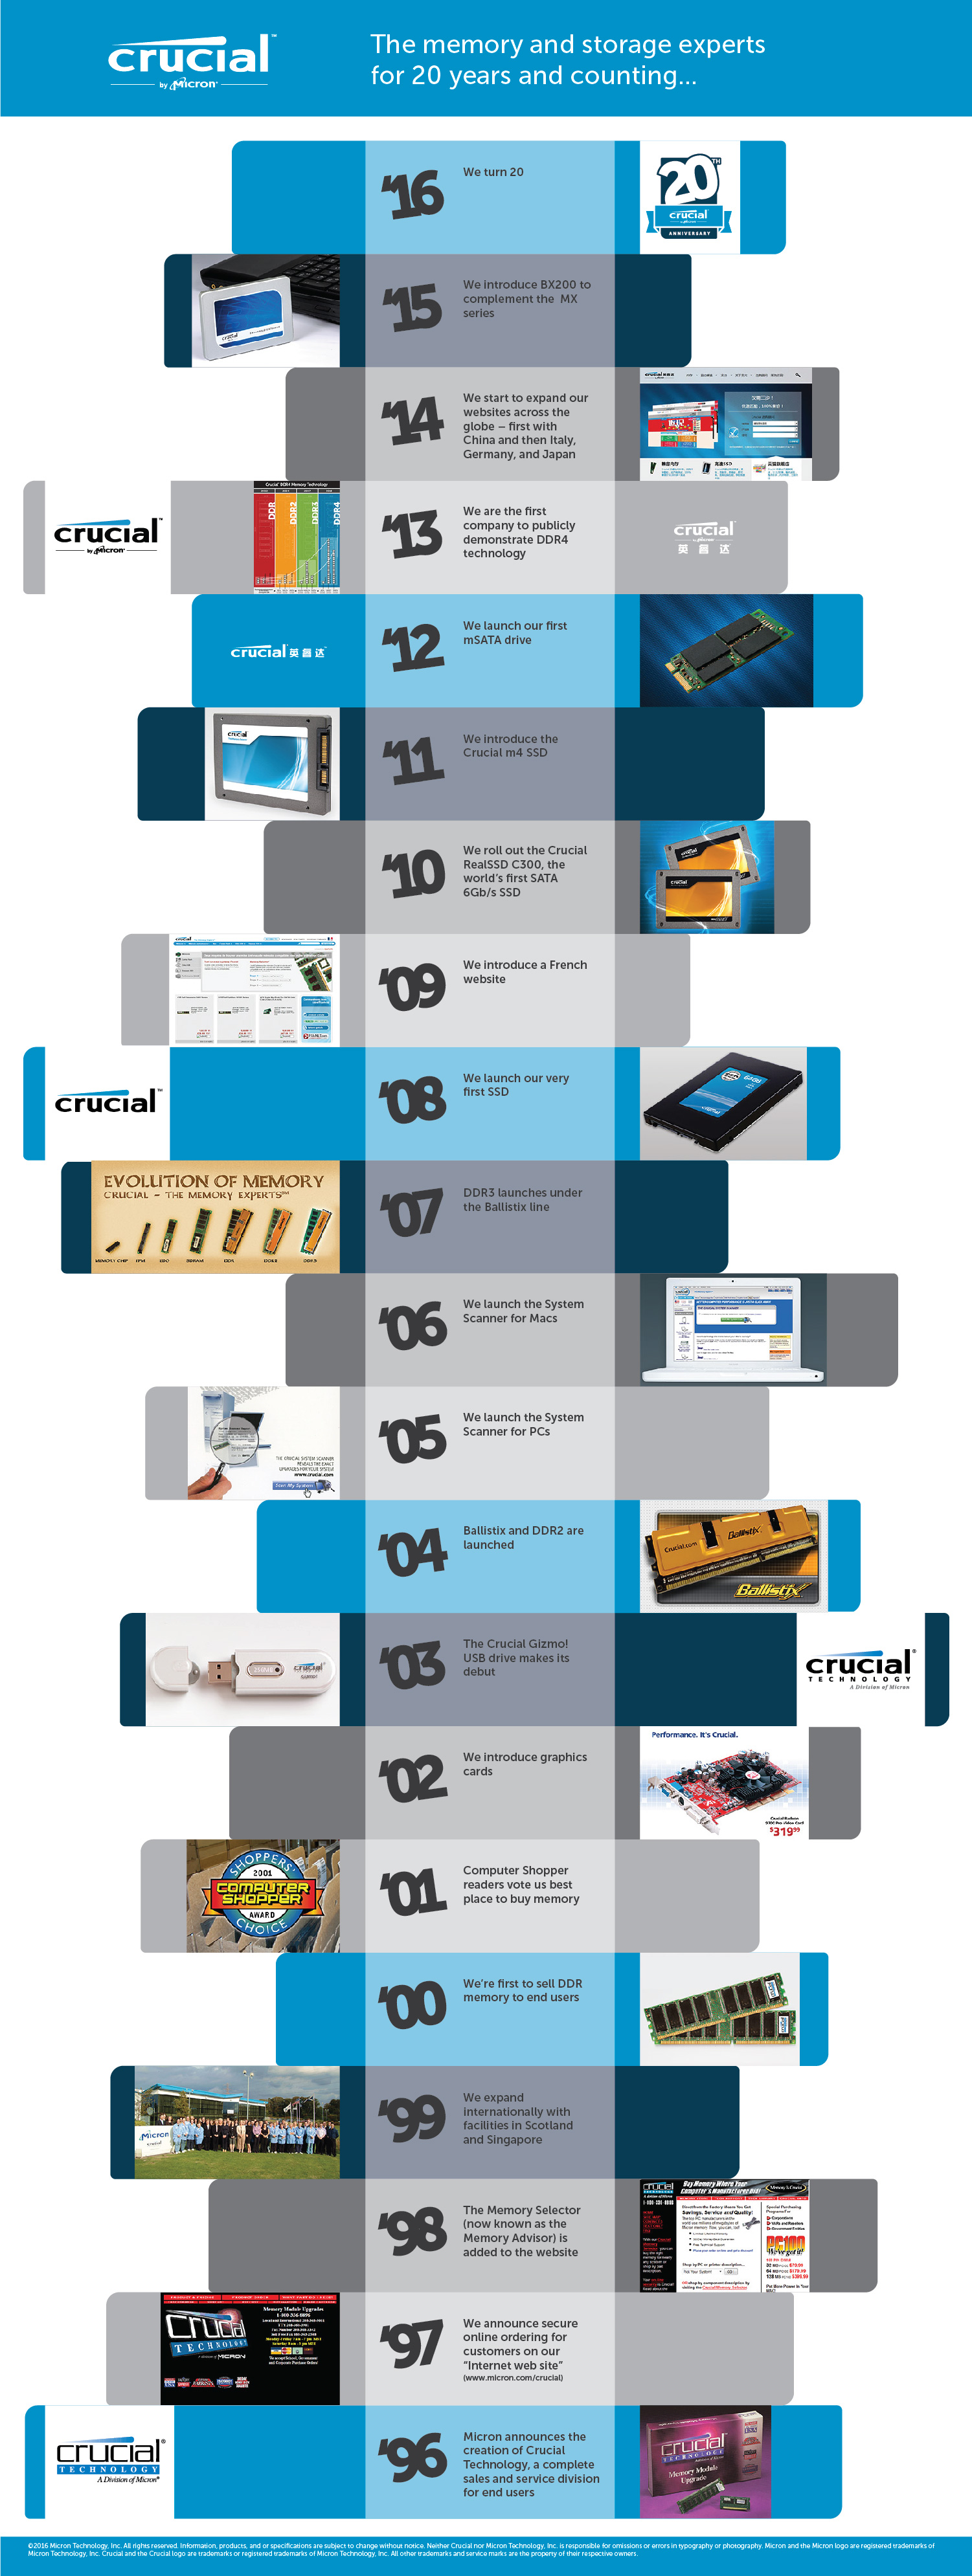 crucial-20-anniversary-timeline-102x42-wall